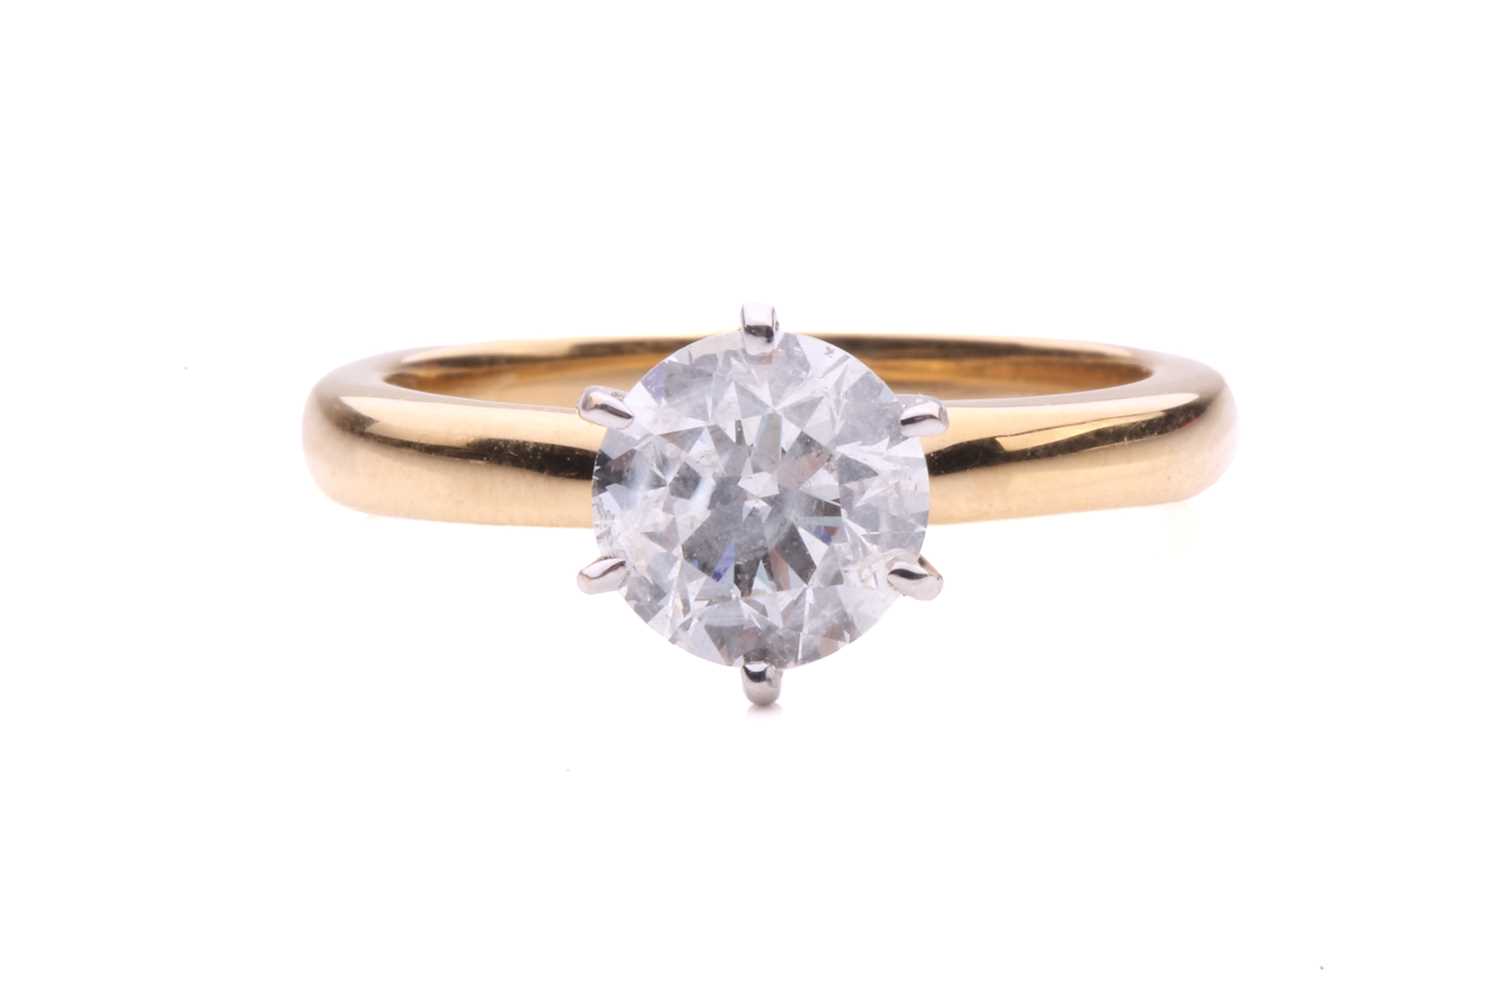 A diamond solitaire ring in 18ct gold, centred with a brilliant-cut diamond of 6.7 mm with an